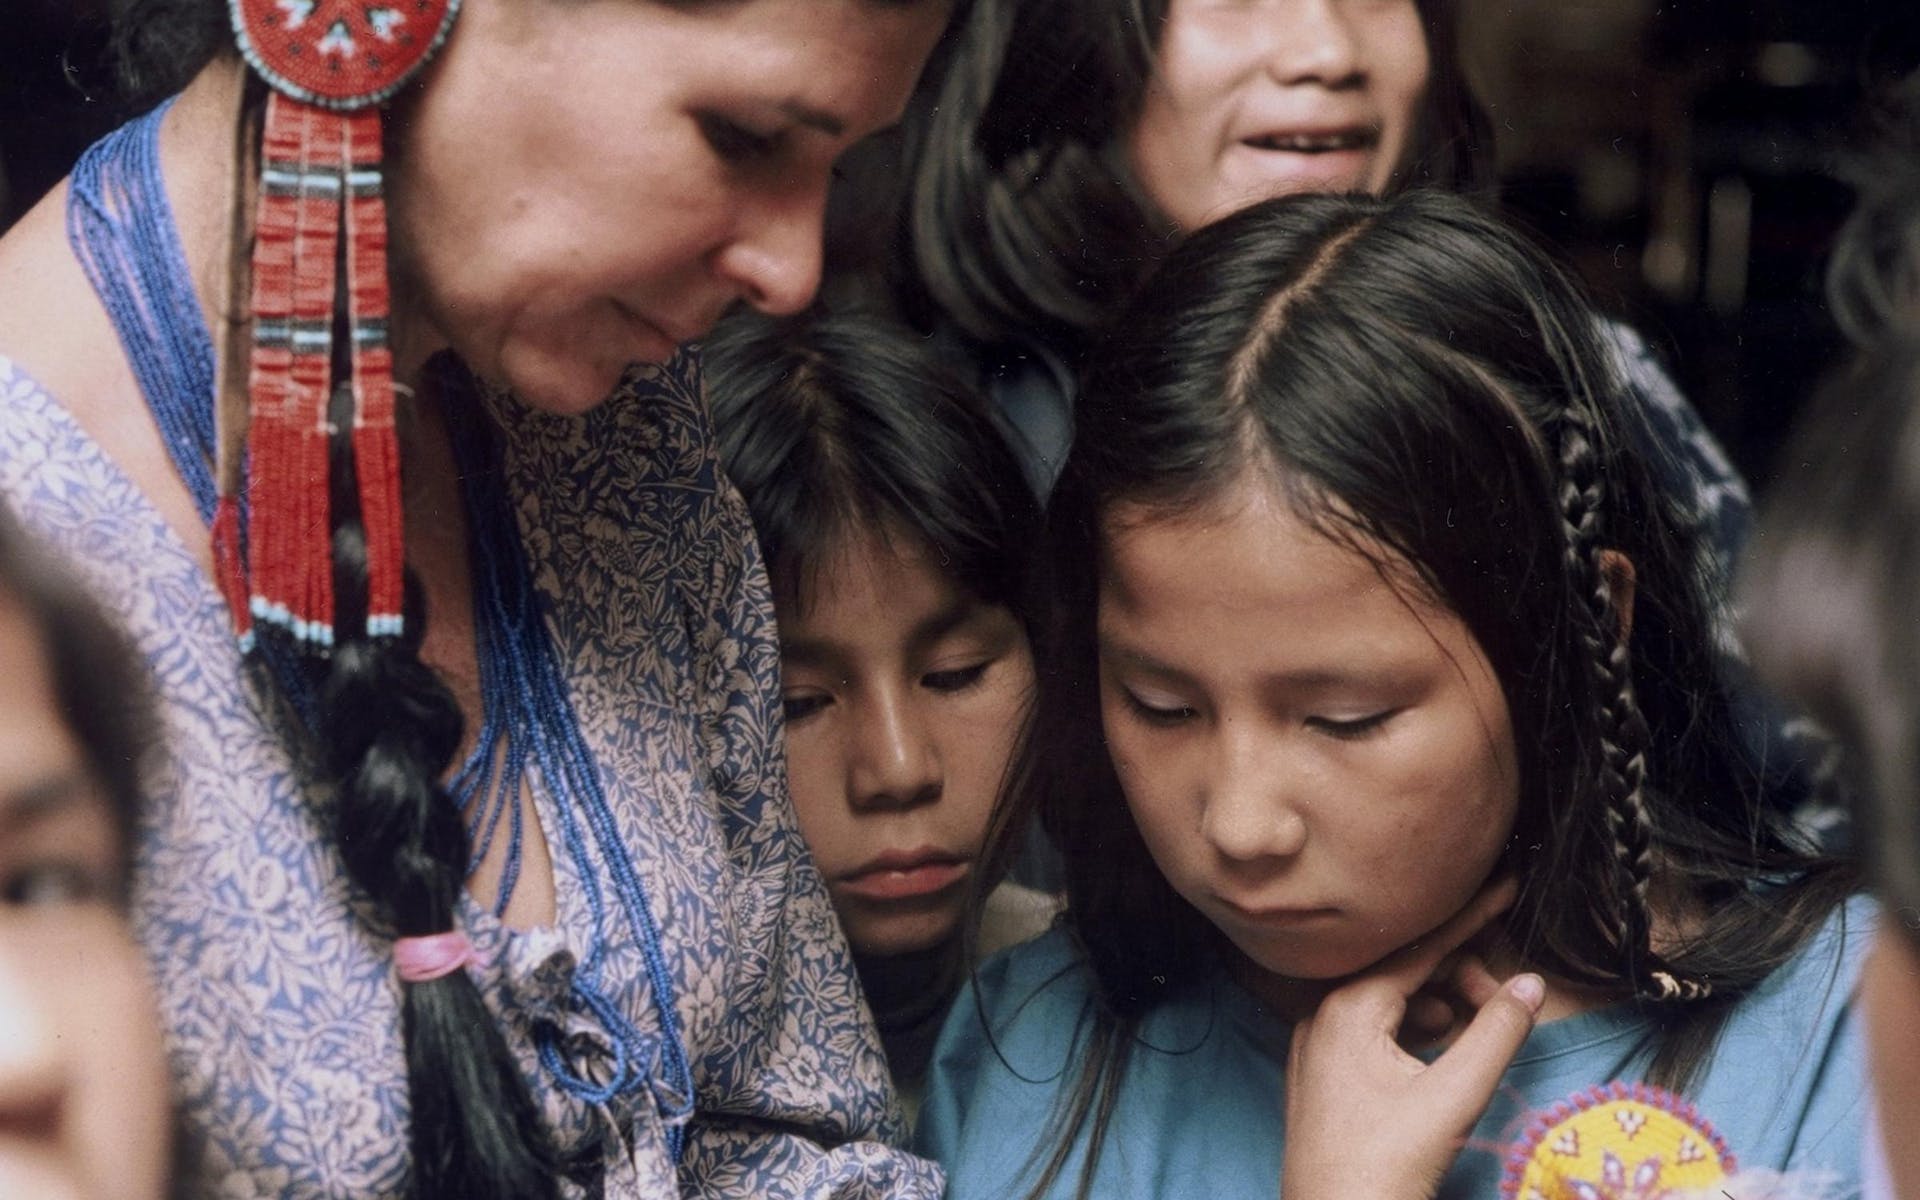 Alanis Obomsawin wearing a dress and beaded jewelry looks down at something in her lap with children around her looking on.